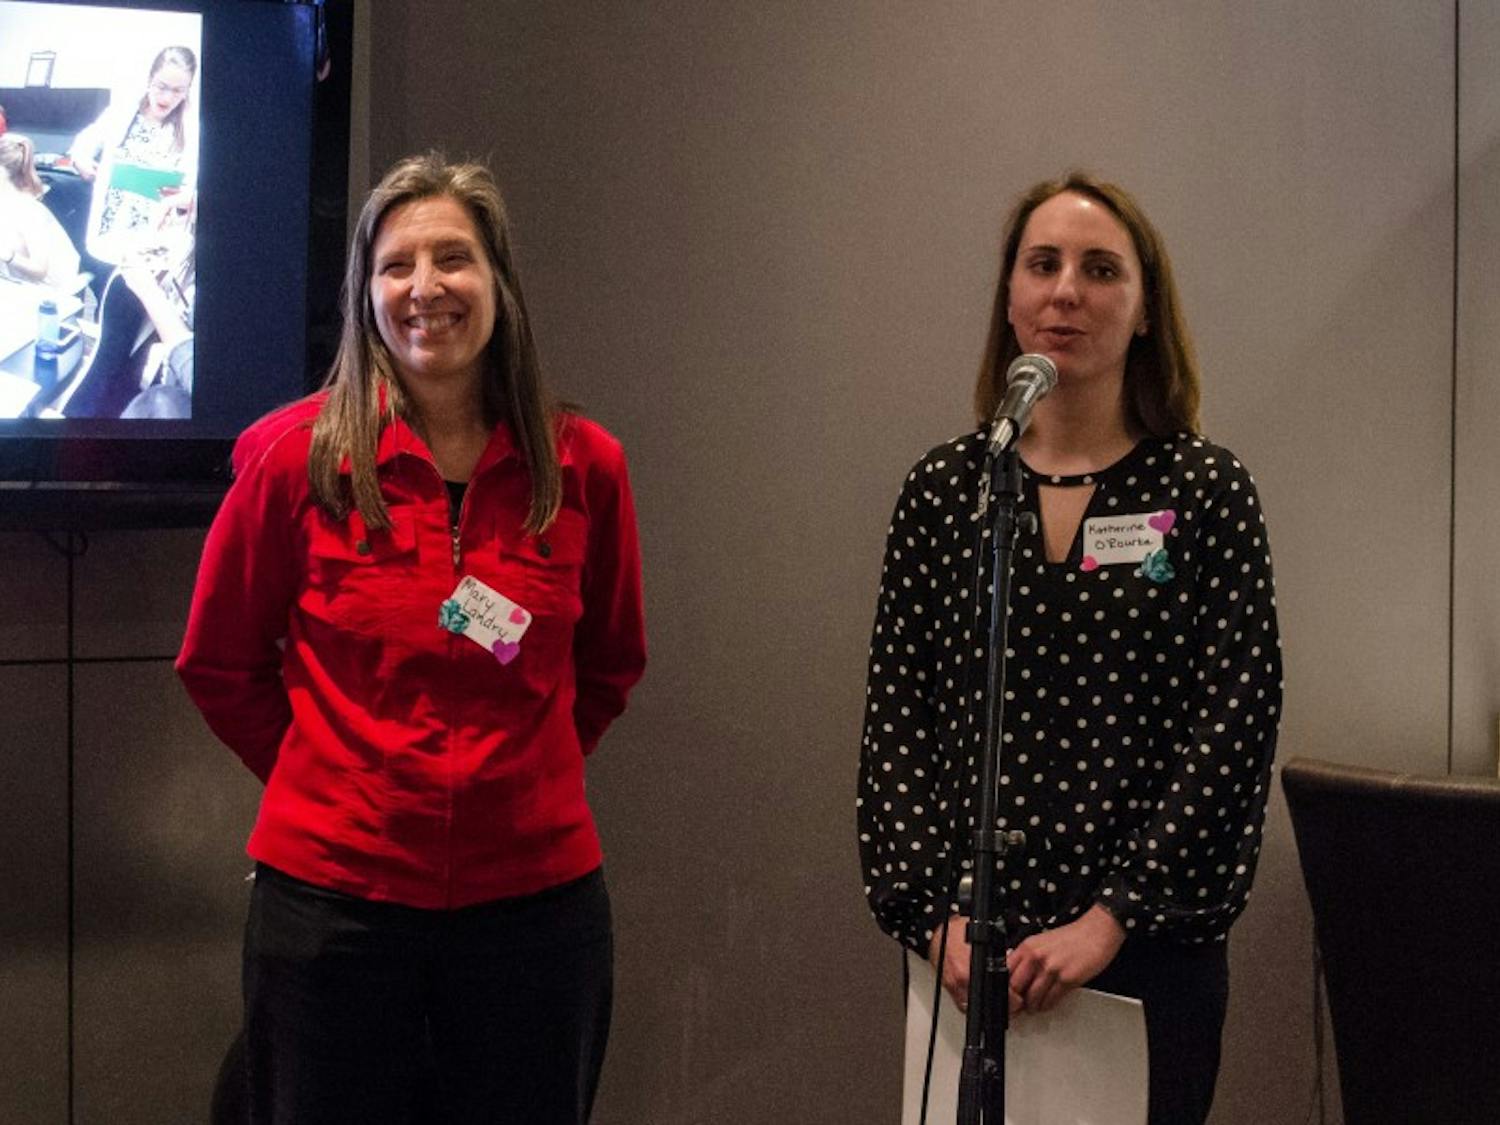 Community doctors Mary Landry (left) and Katherine O’Rourke (right) founded Share the Health after realizing there was no place in the Dane County area where uninsured women could go for these services without having to pay out-of-pocket.